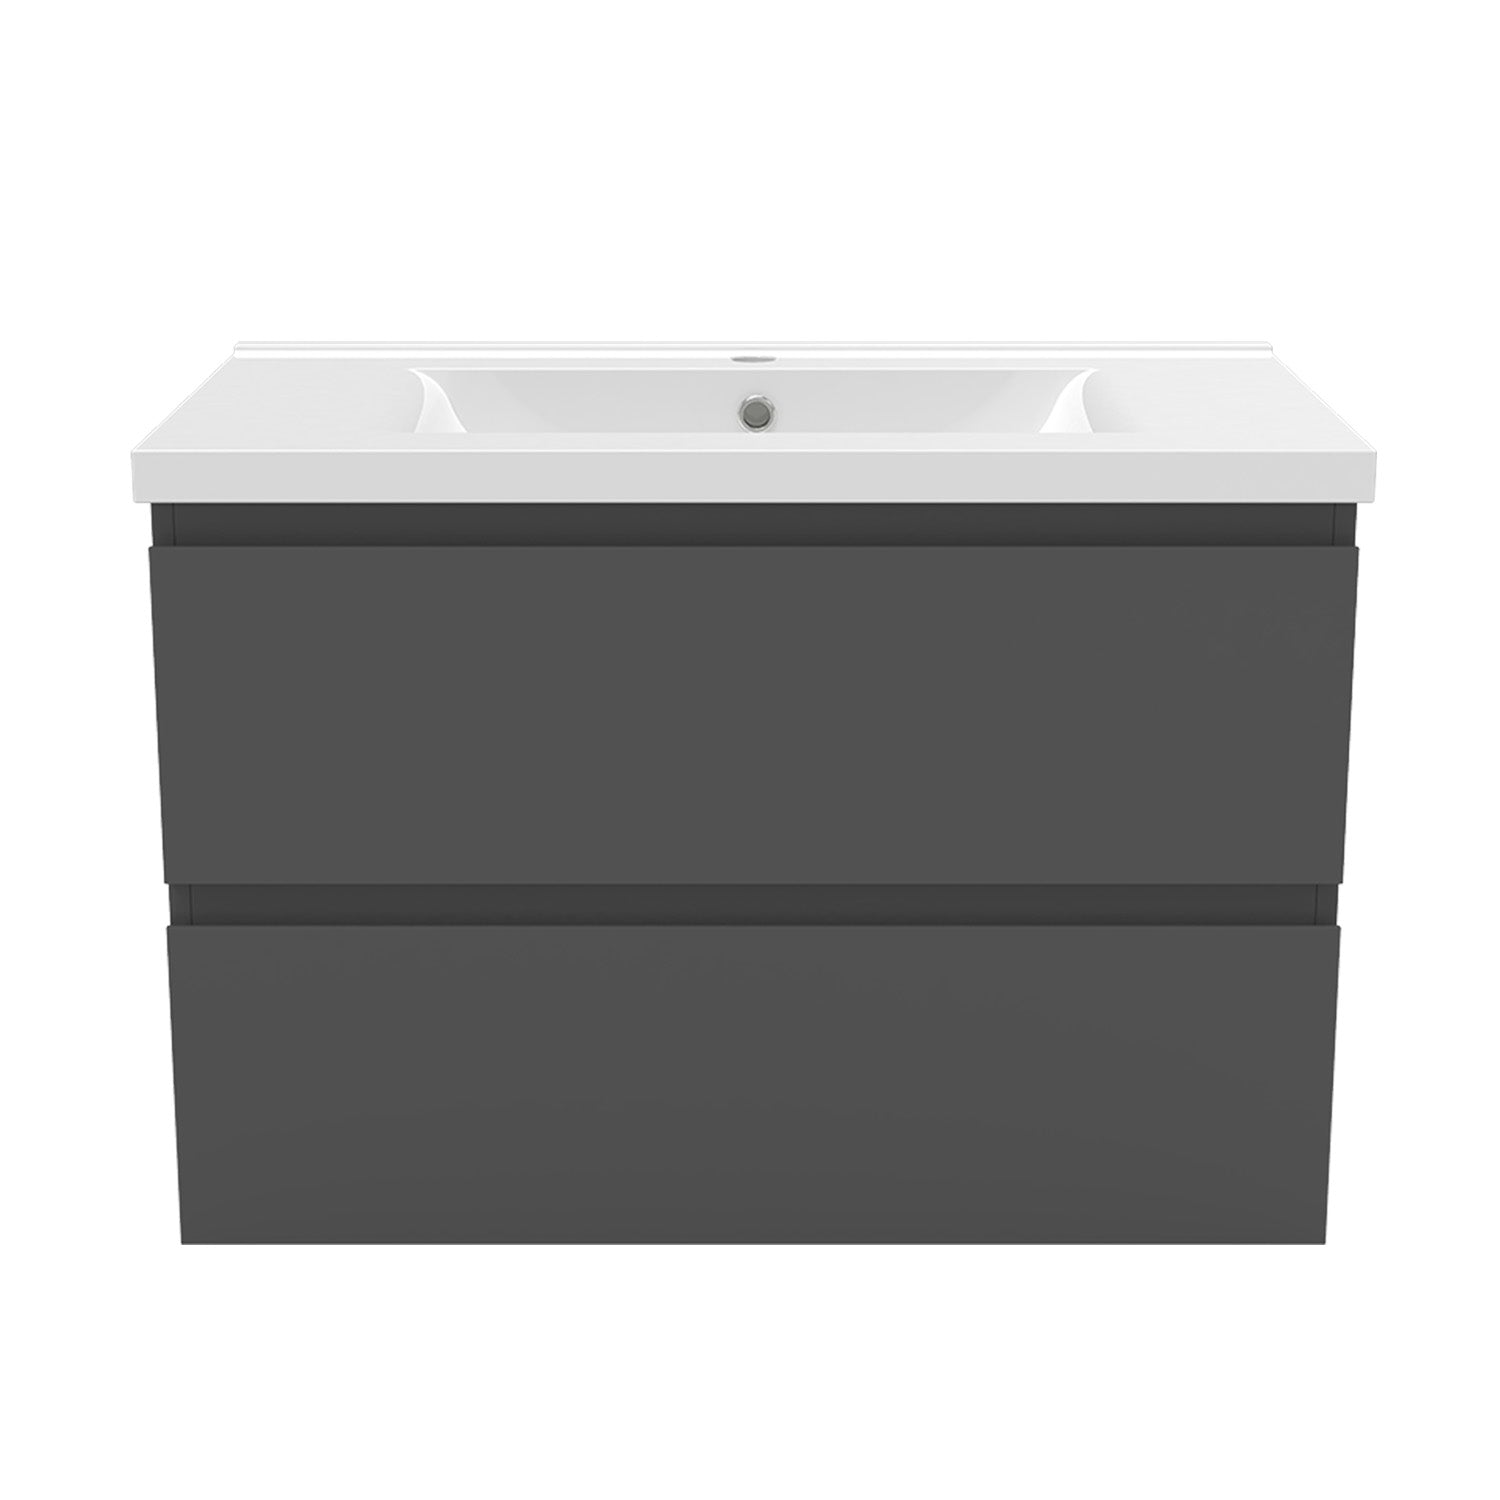 800mm Wide Wall Mounted Vanity Units and Sink 2 Drawers - Matt Grey